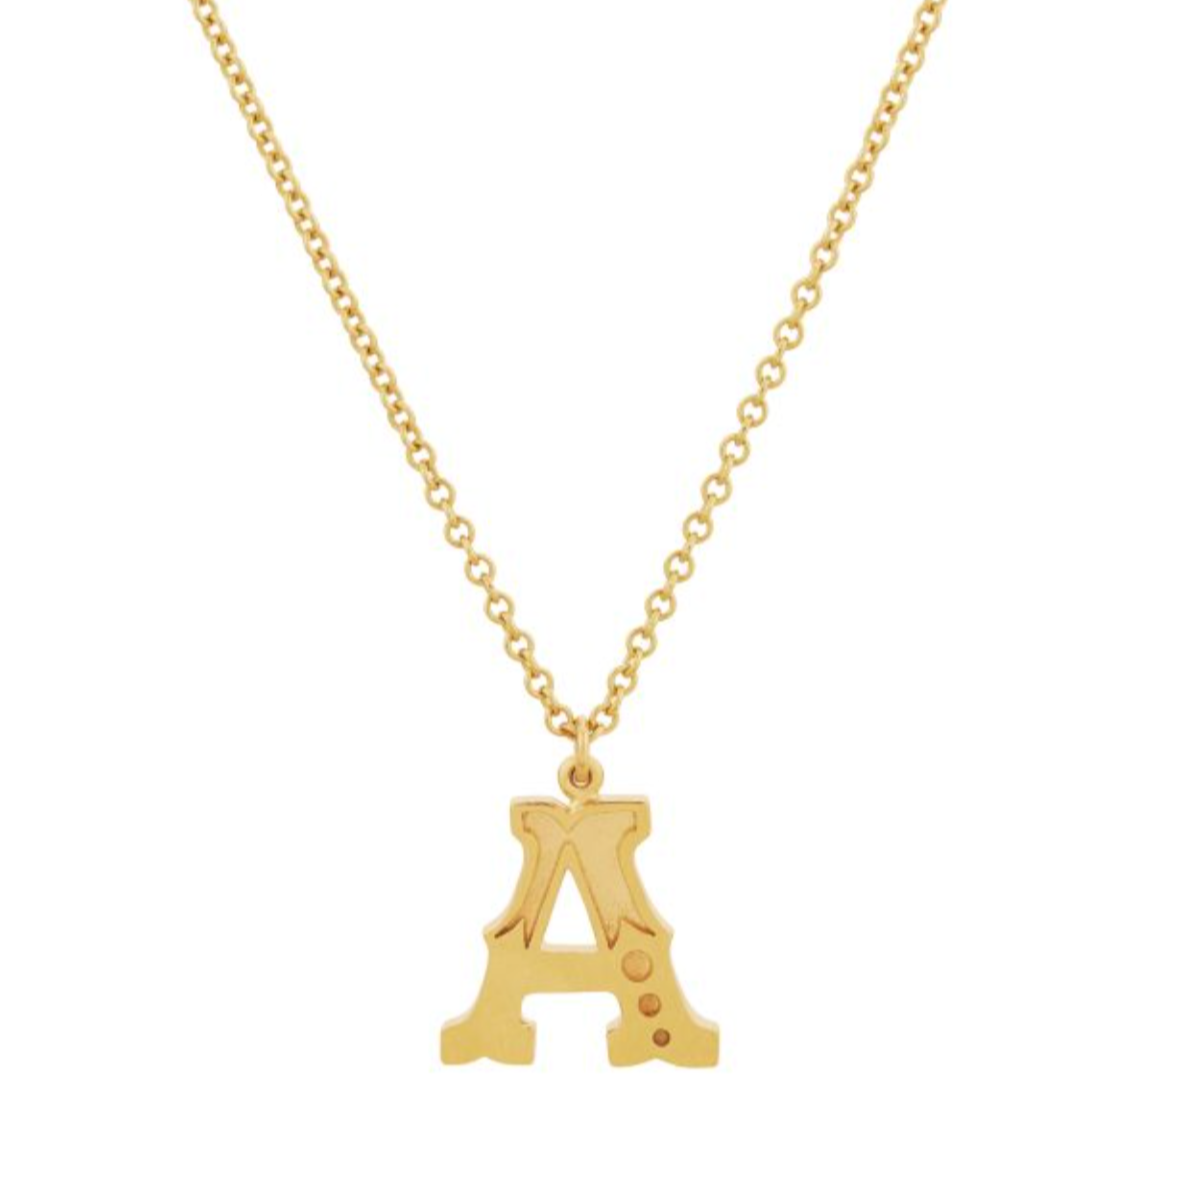 gold gothic a initial pendant necklace on a white background